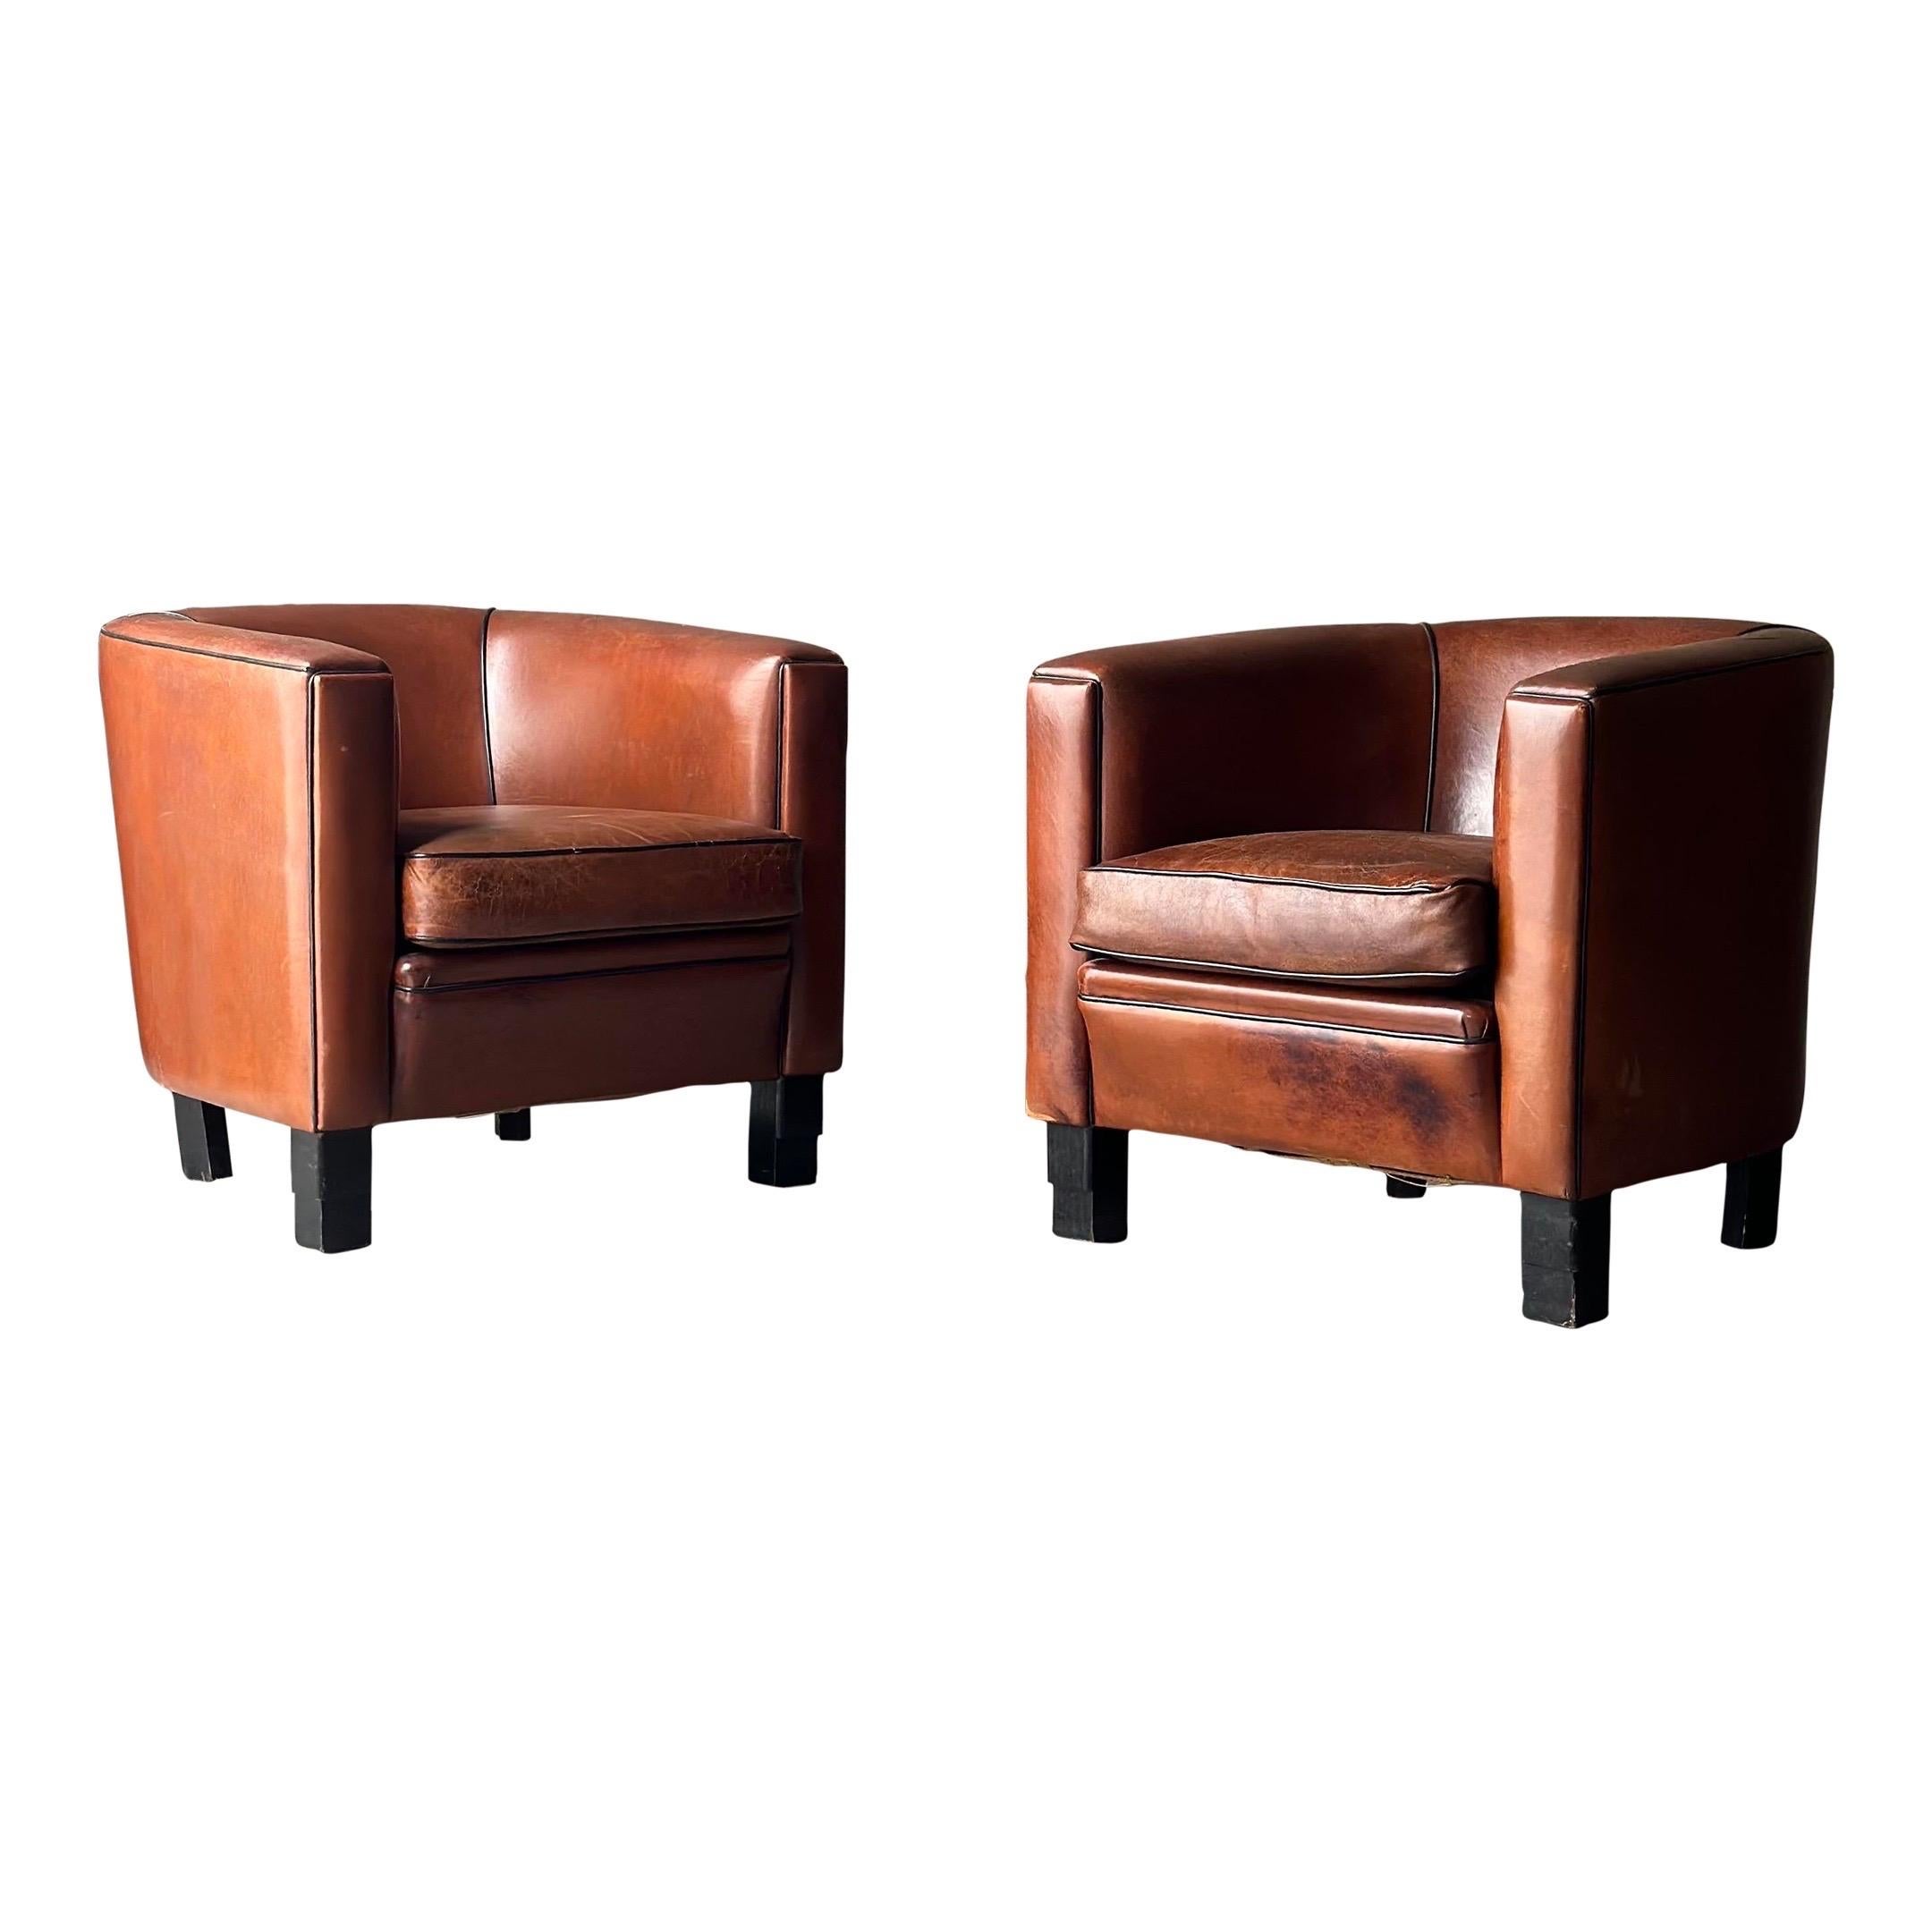 Dutch Sheep’s Leather Club Chairs - a Pair For Sale